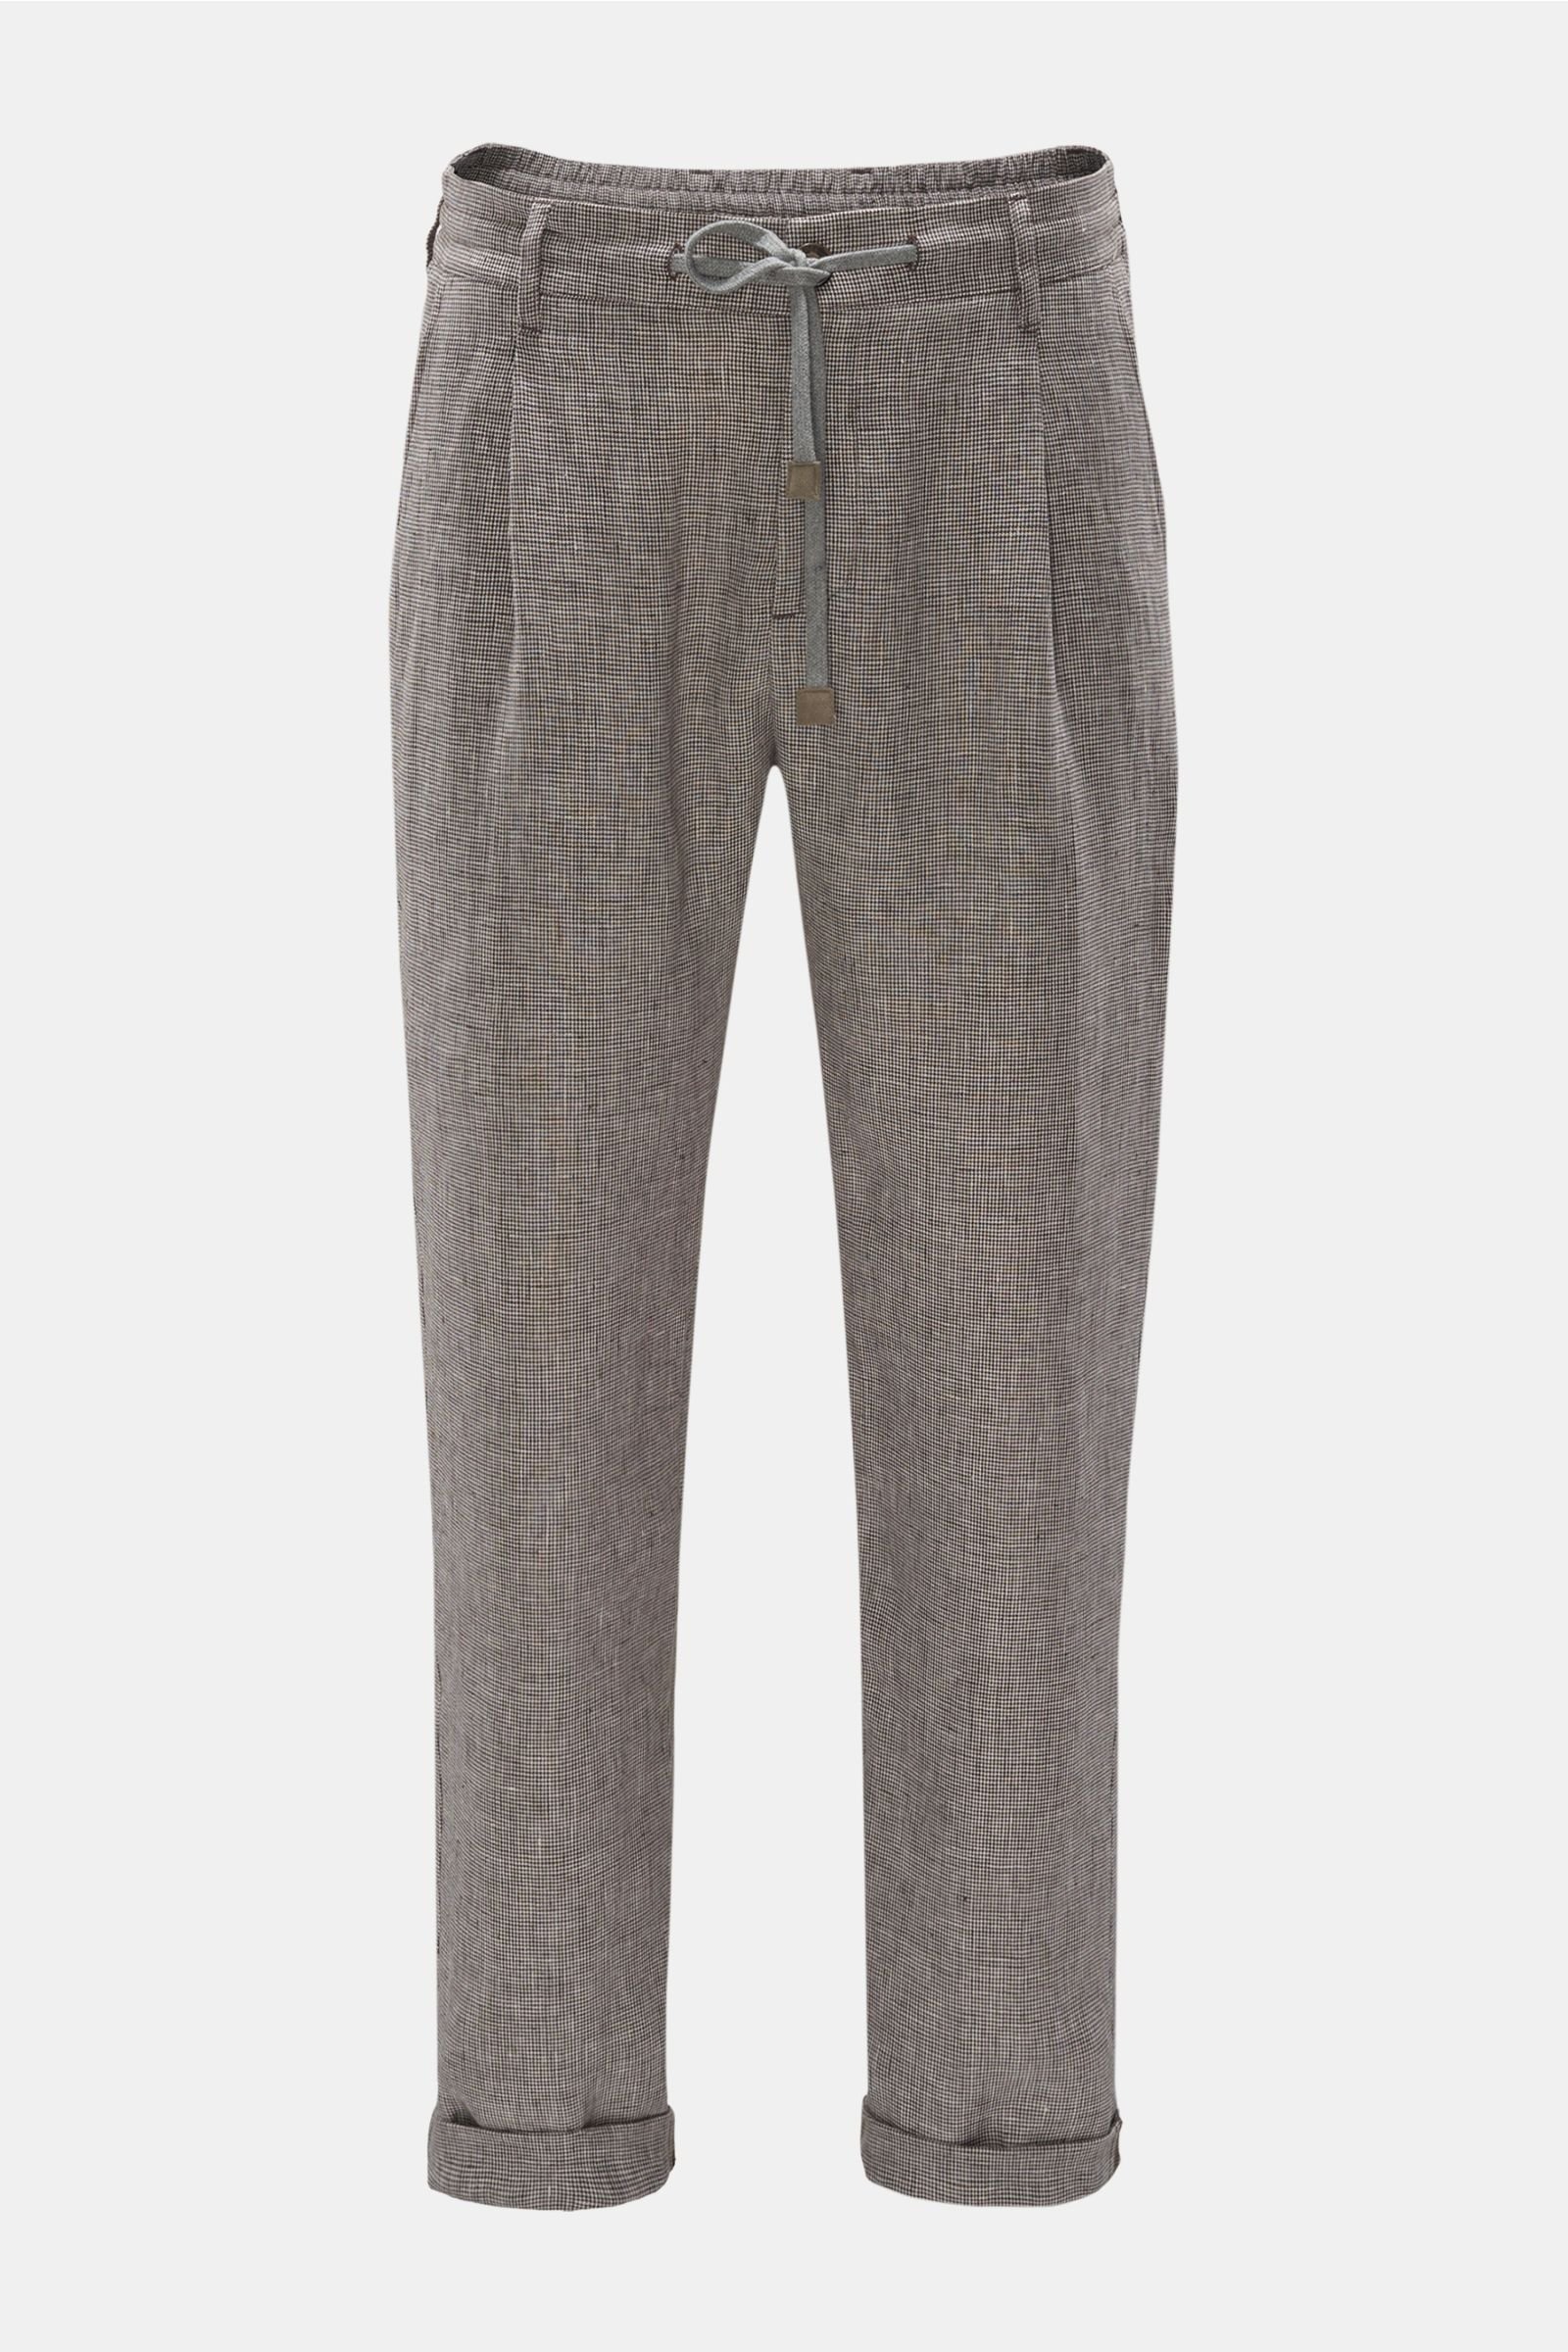 Linen jogger pants grey-brown/white checked